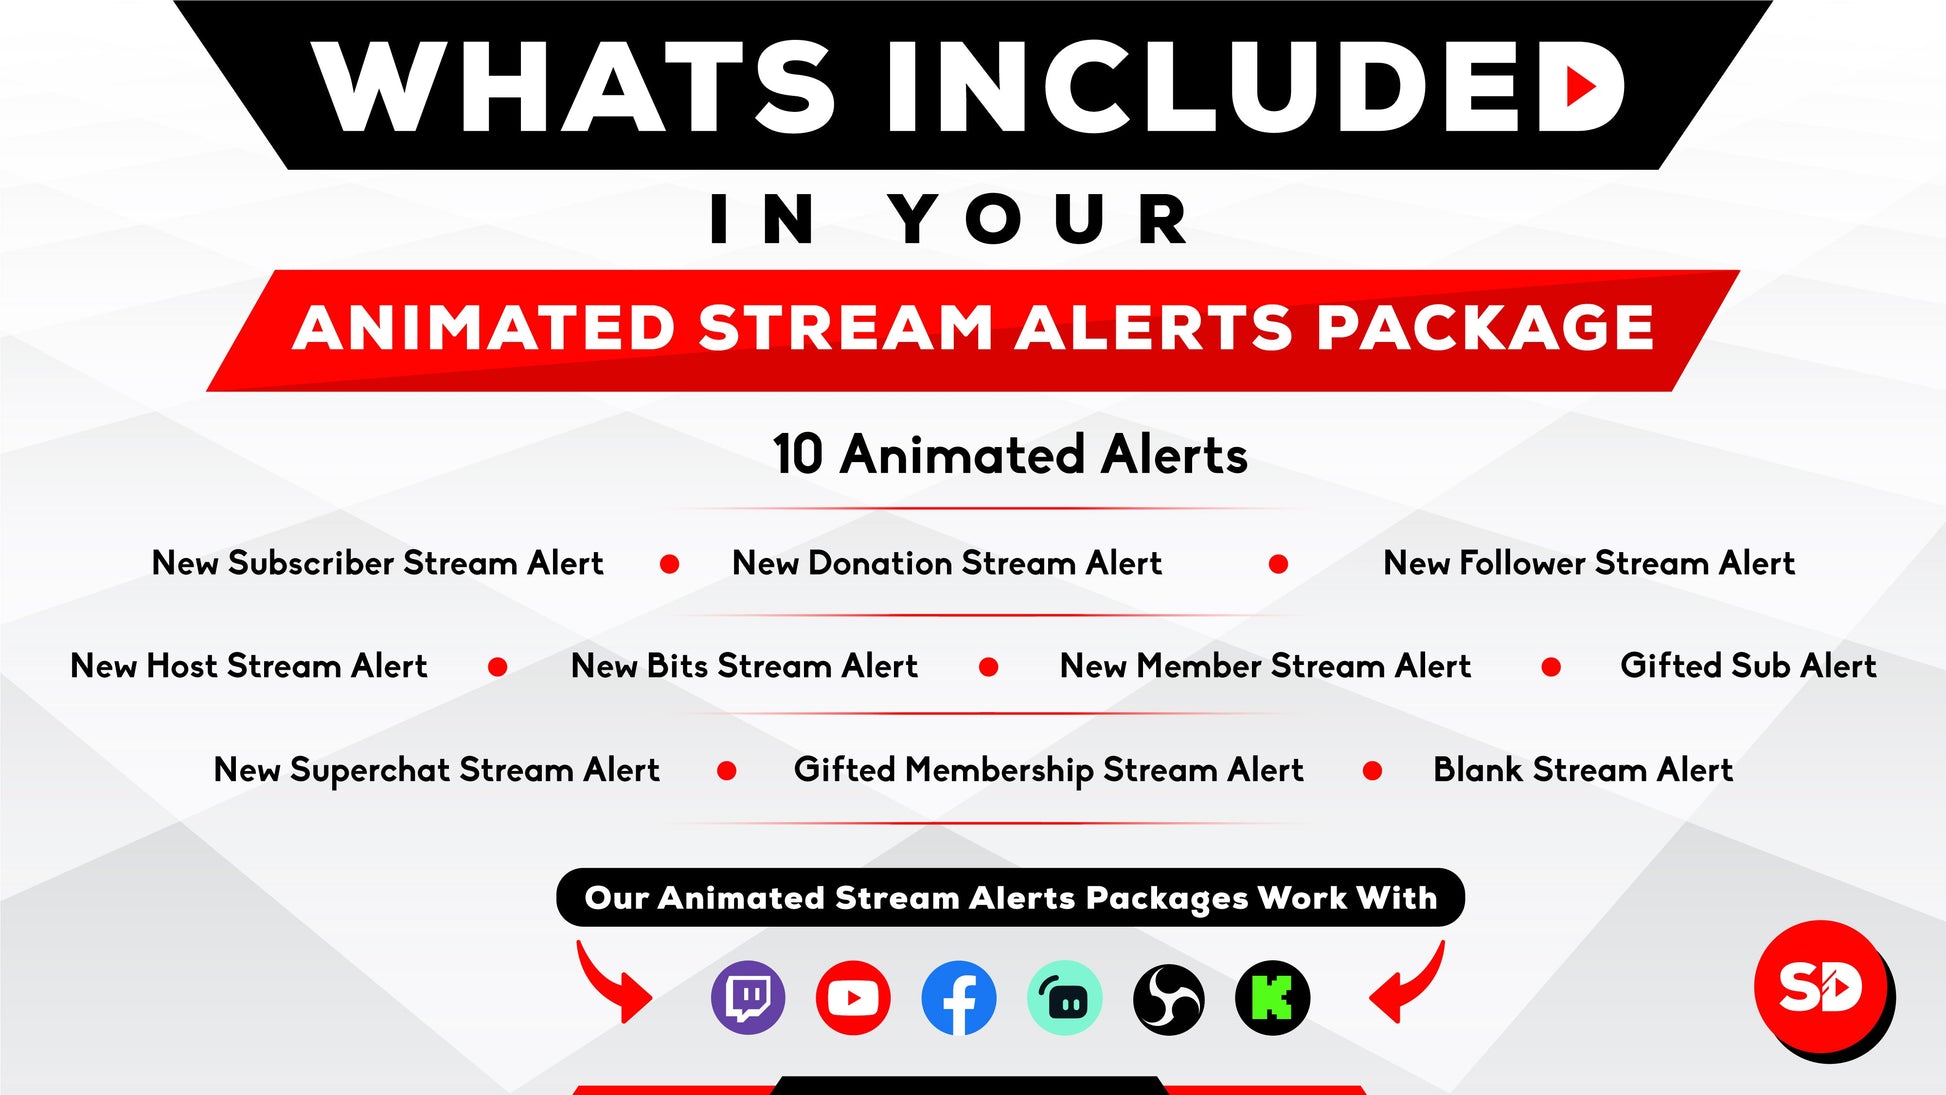 whats included in your package - animated alerts - area of effect - stream designz